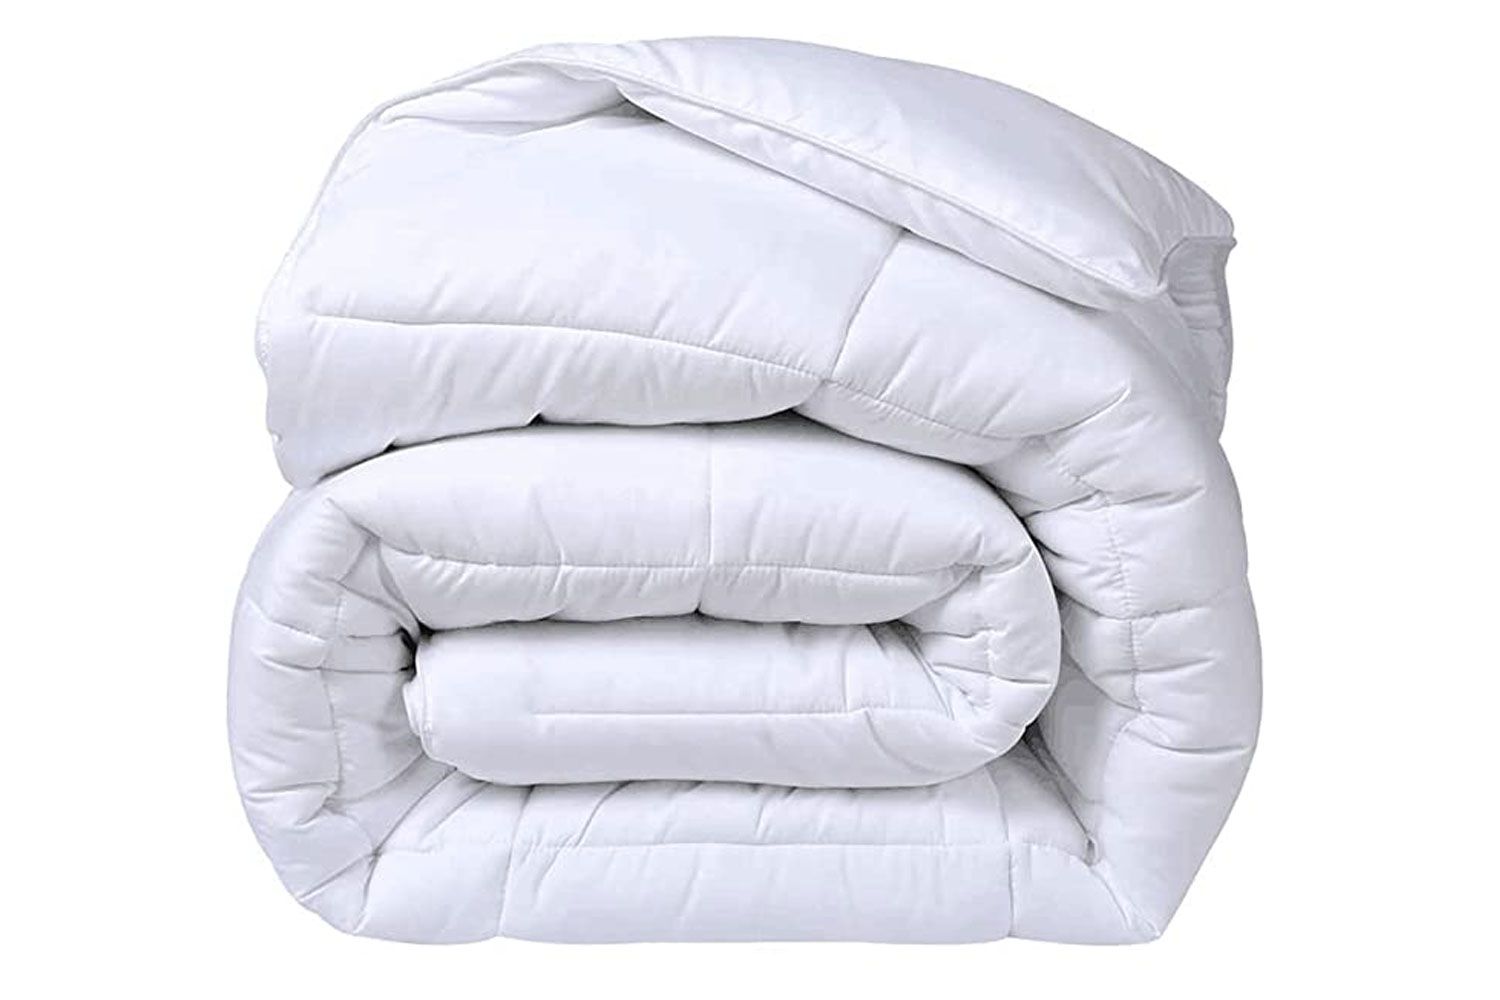 Cohome 2100 Series Down Alternative Quilted Duvet Insert